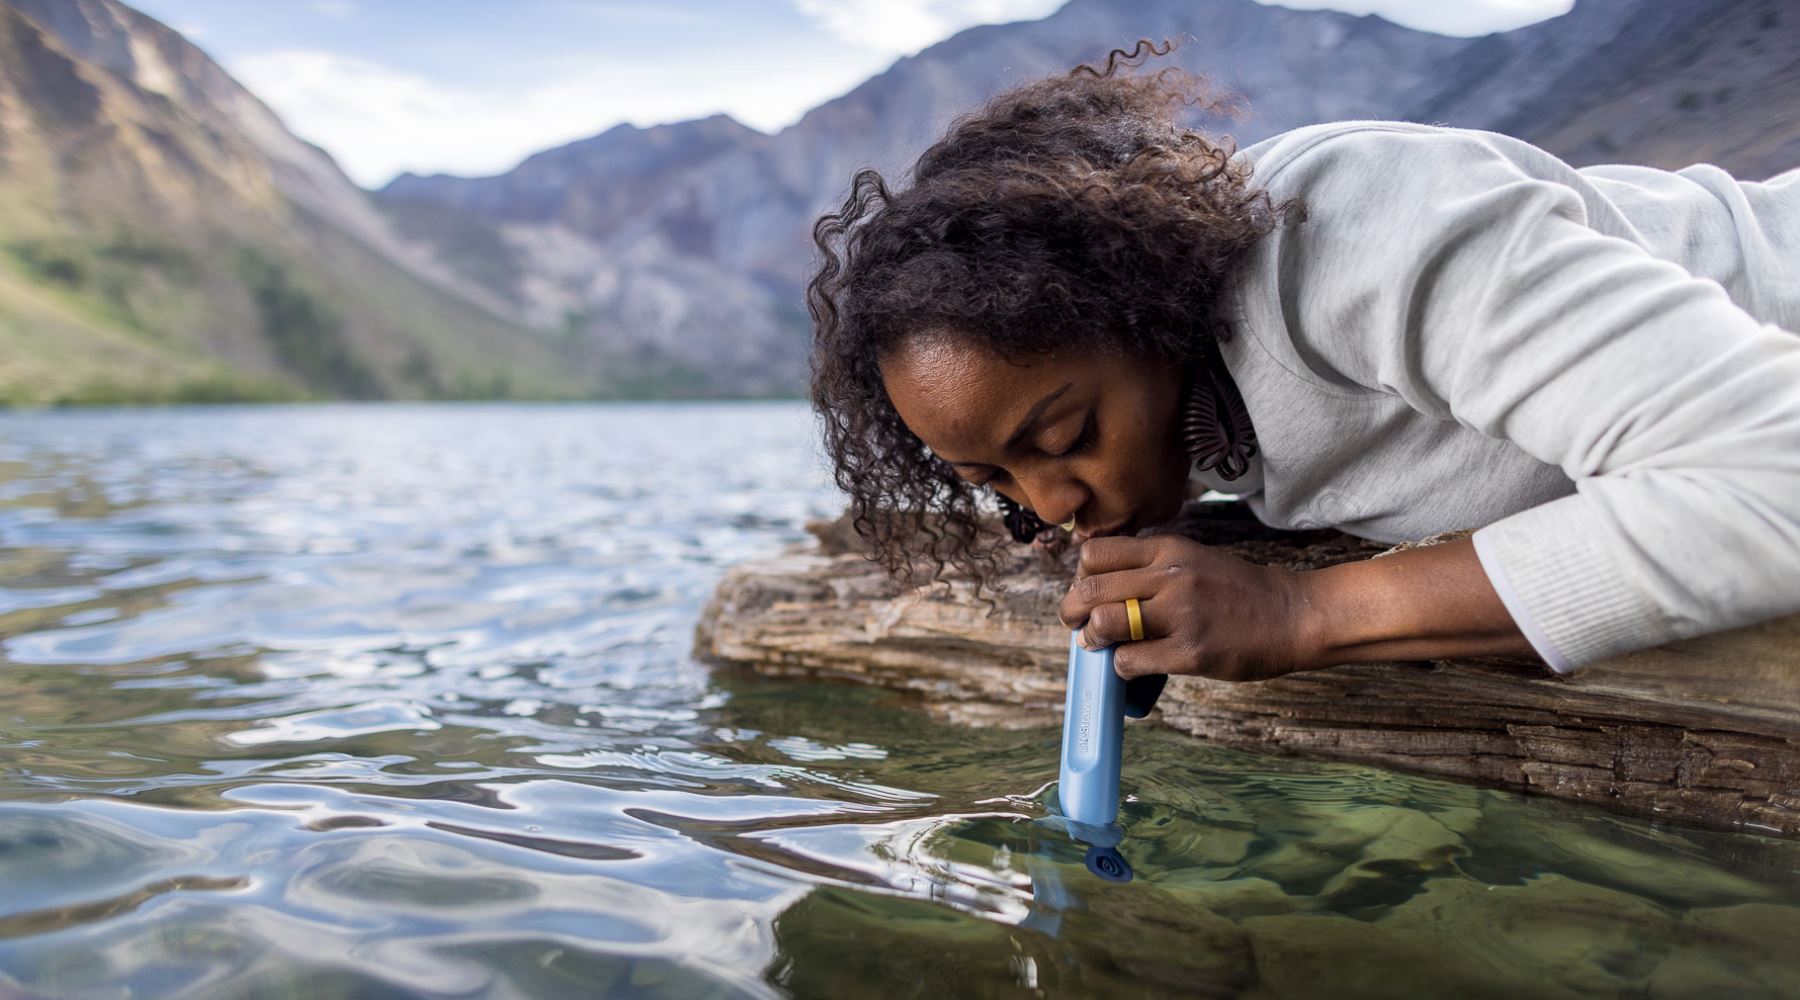 LifeStraw  Lack Of Access To Water